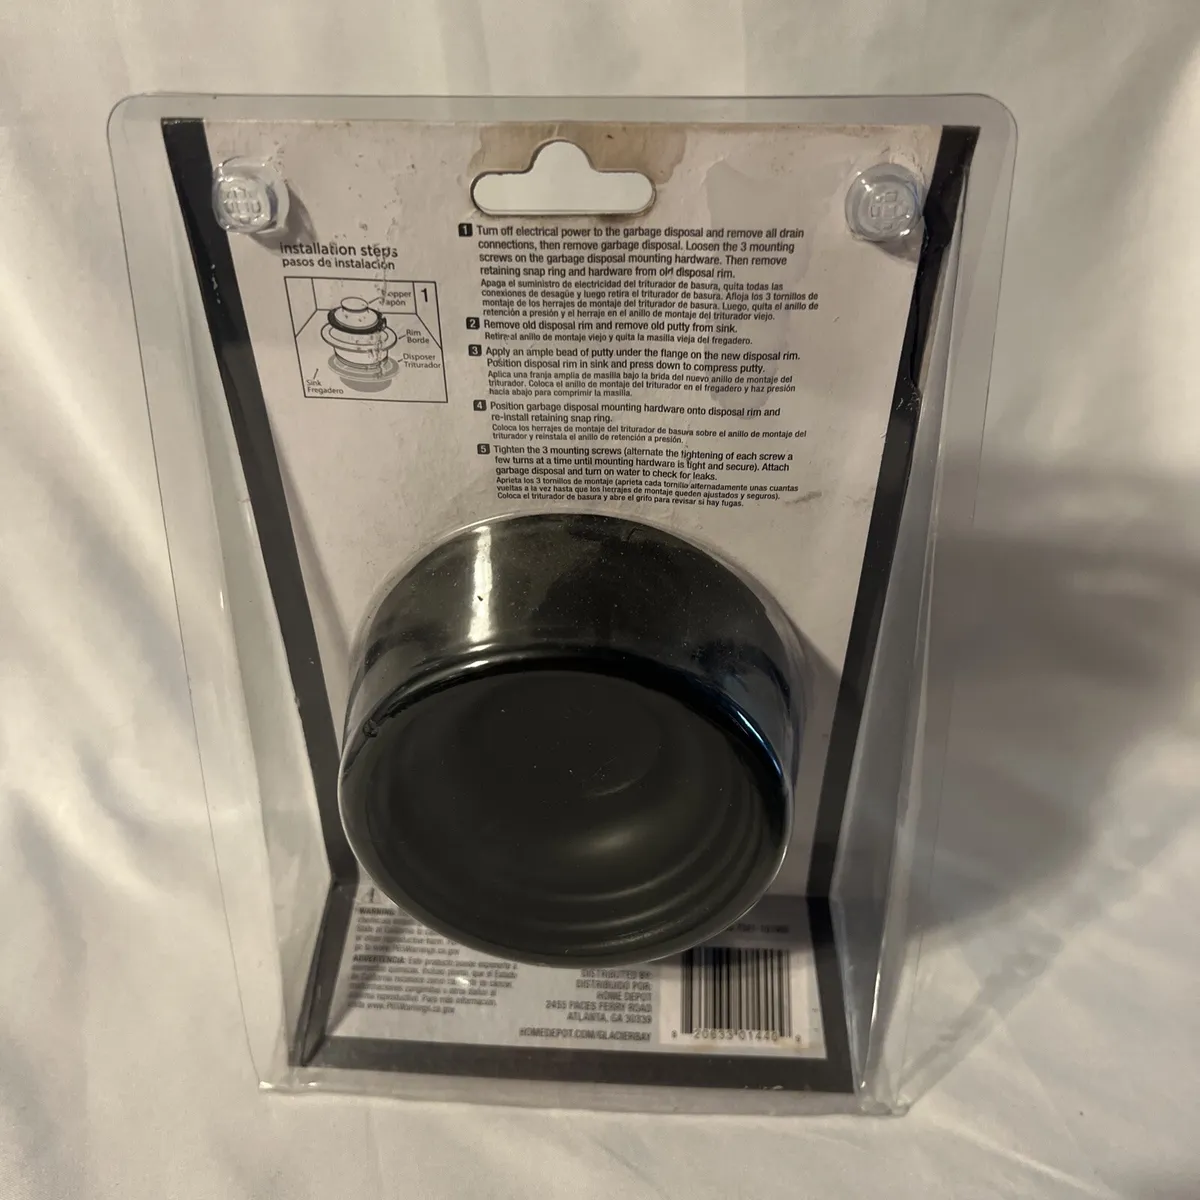 Paulin 1/4-inch External Snap Ring | The Home Depot Canada